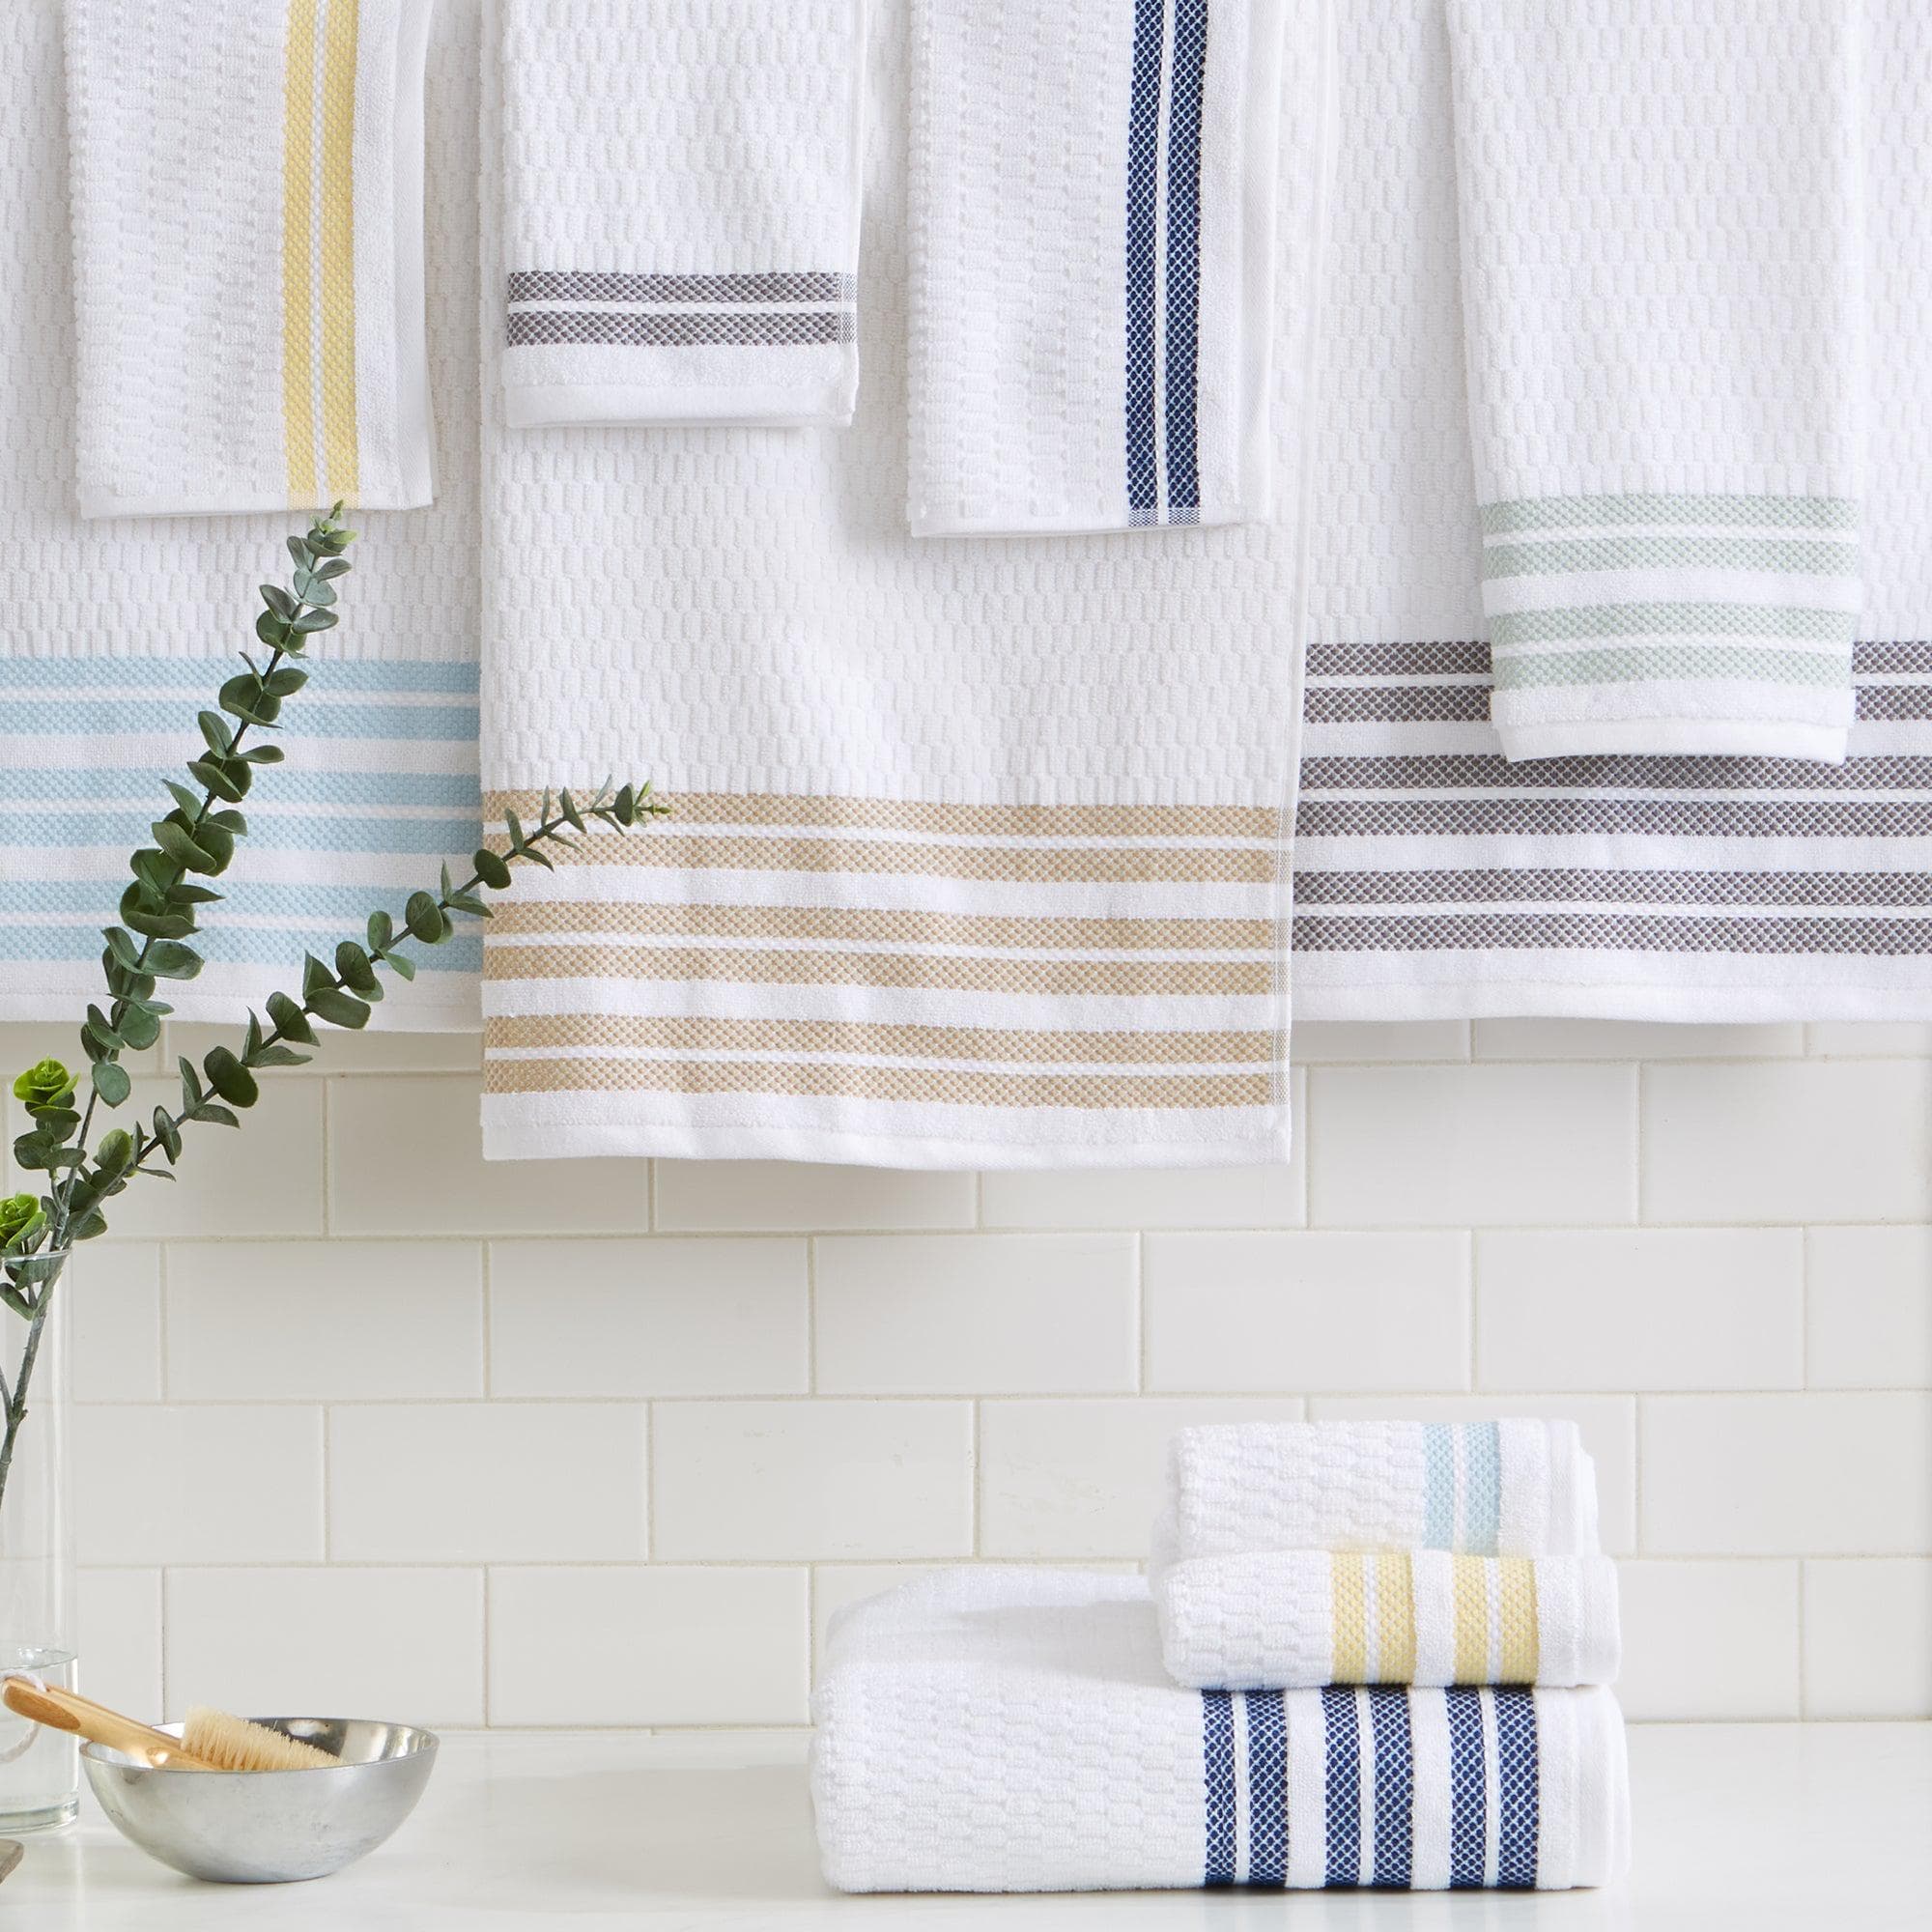 Bayfield 100% Cotton Hotel Towels